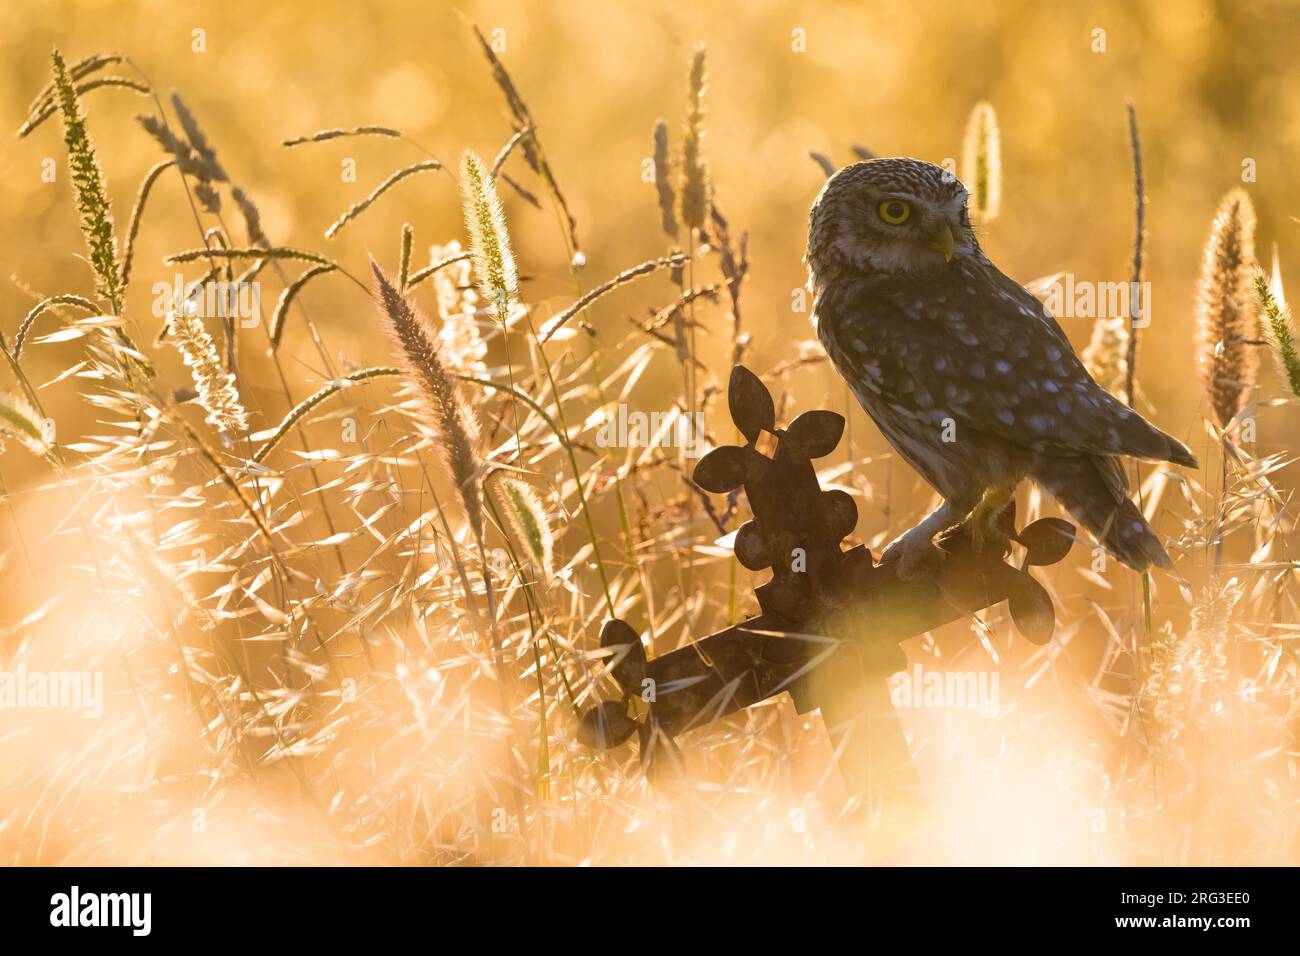 Little Owl (Athene noctua) in Italy. Photographed with beautiful backlight. Stock Photo